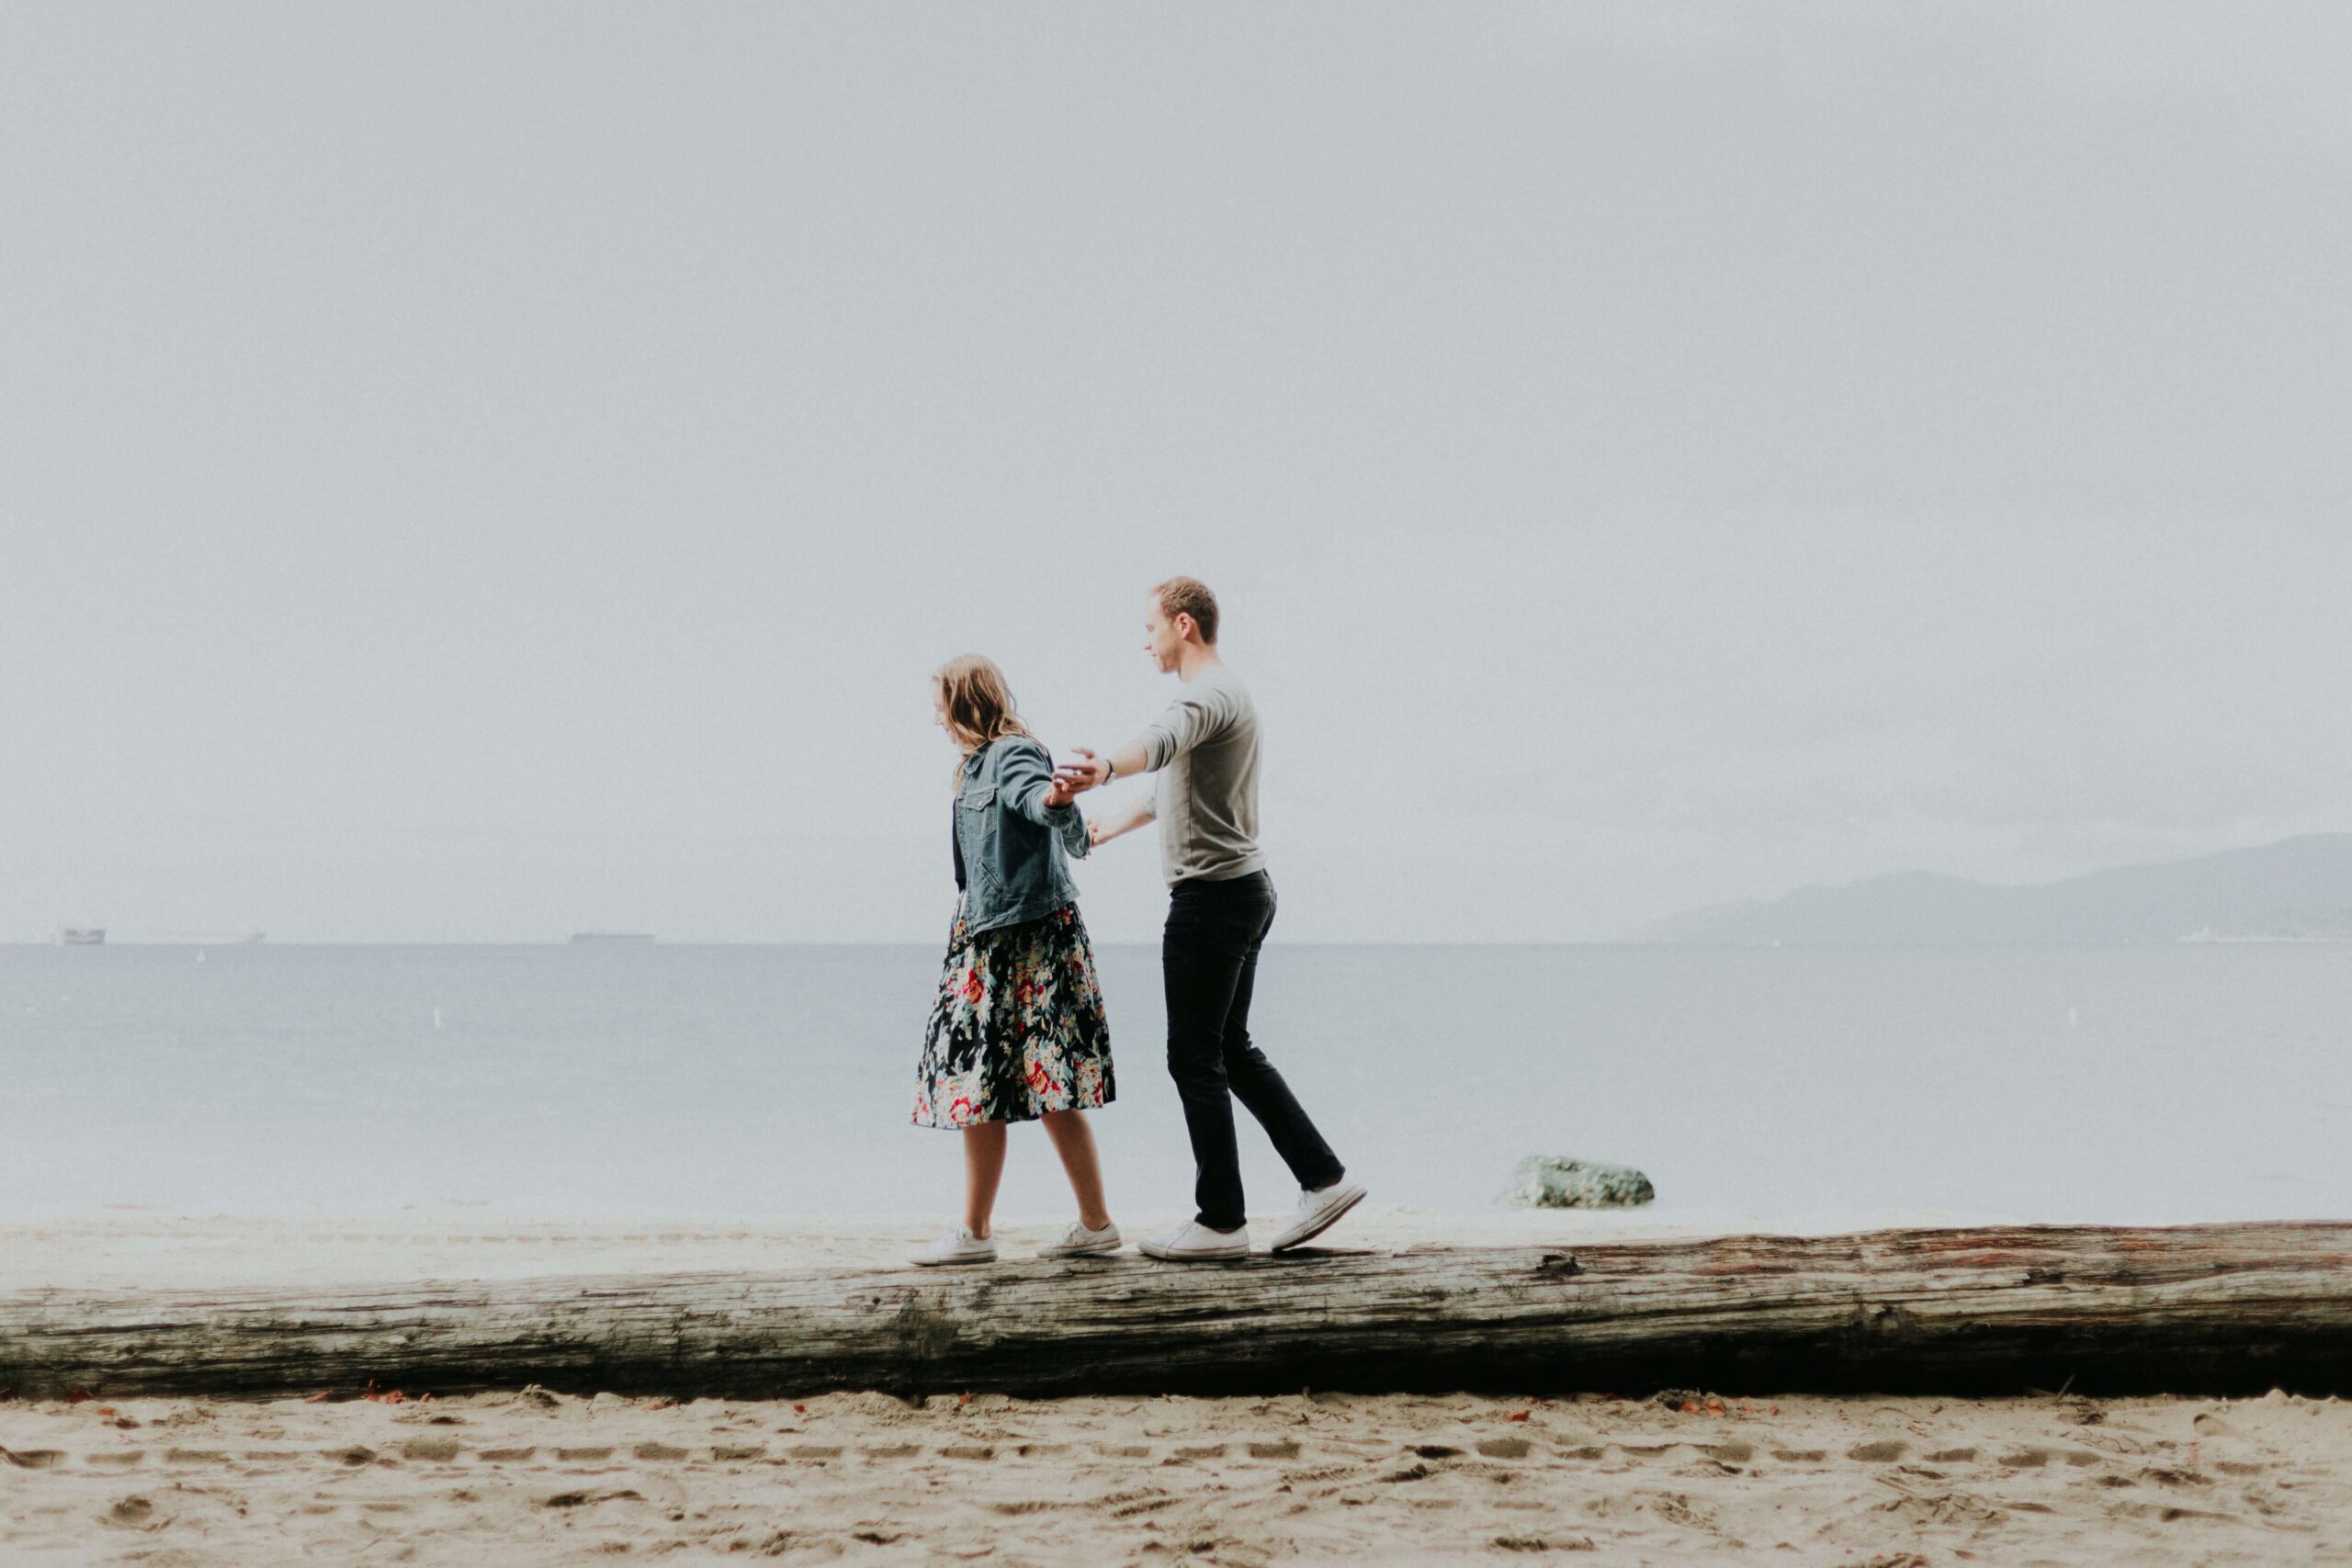 Image of a young woman and man walking on a log on the beach holding hands to balance each other. If you struggle to rebuild trust after cheating in your relationship, learn how couples therapy in Miami, FL can help.